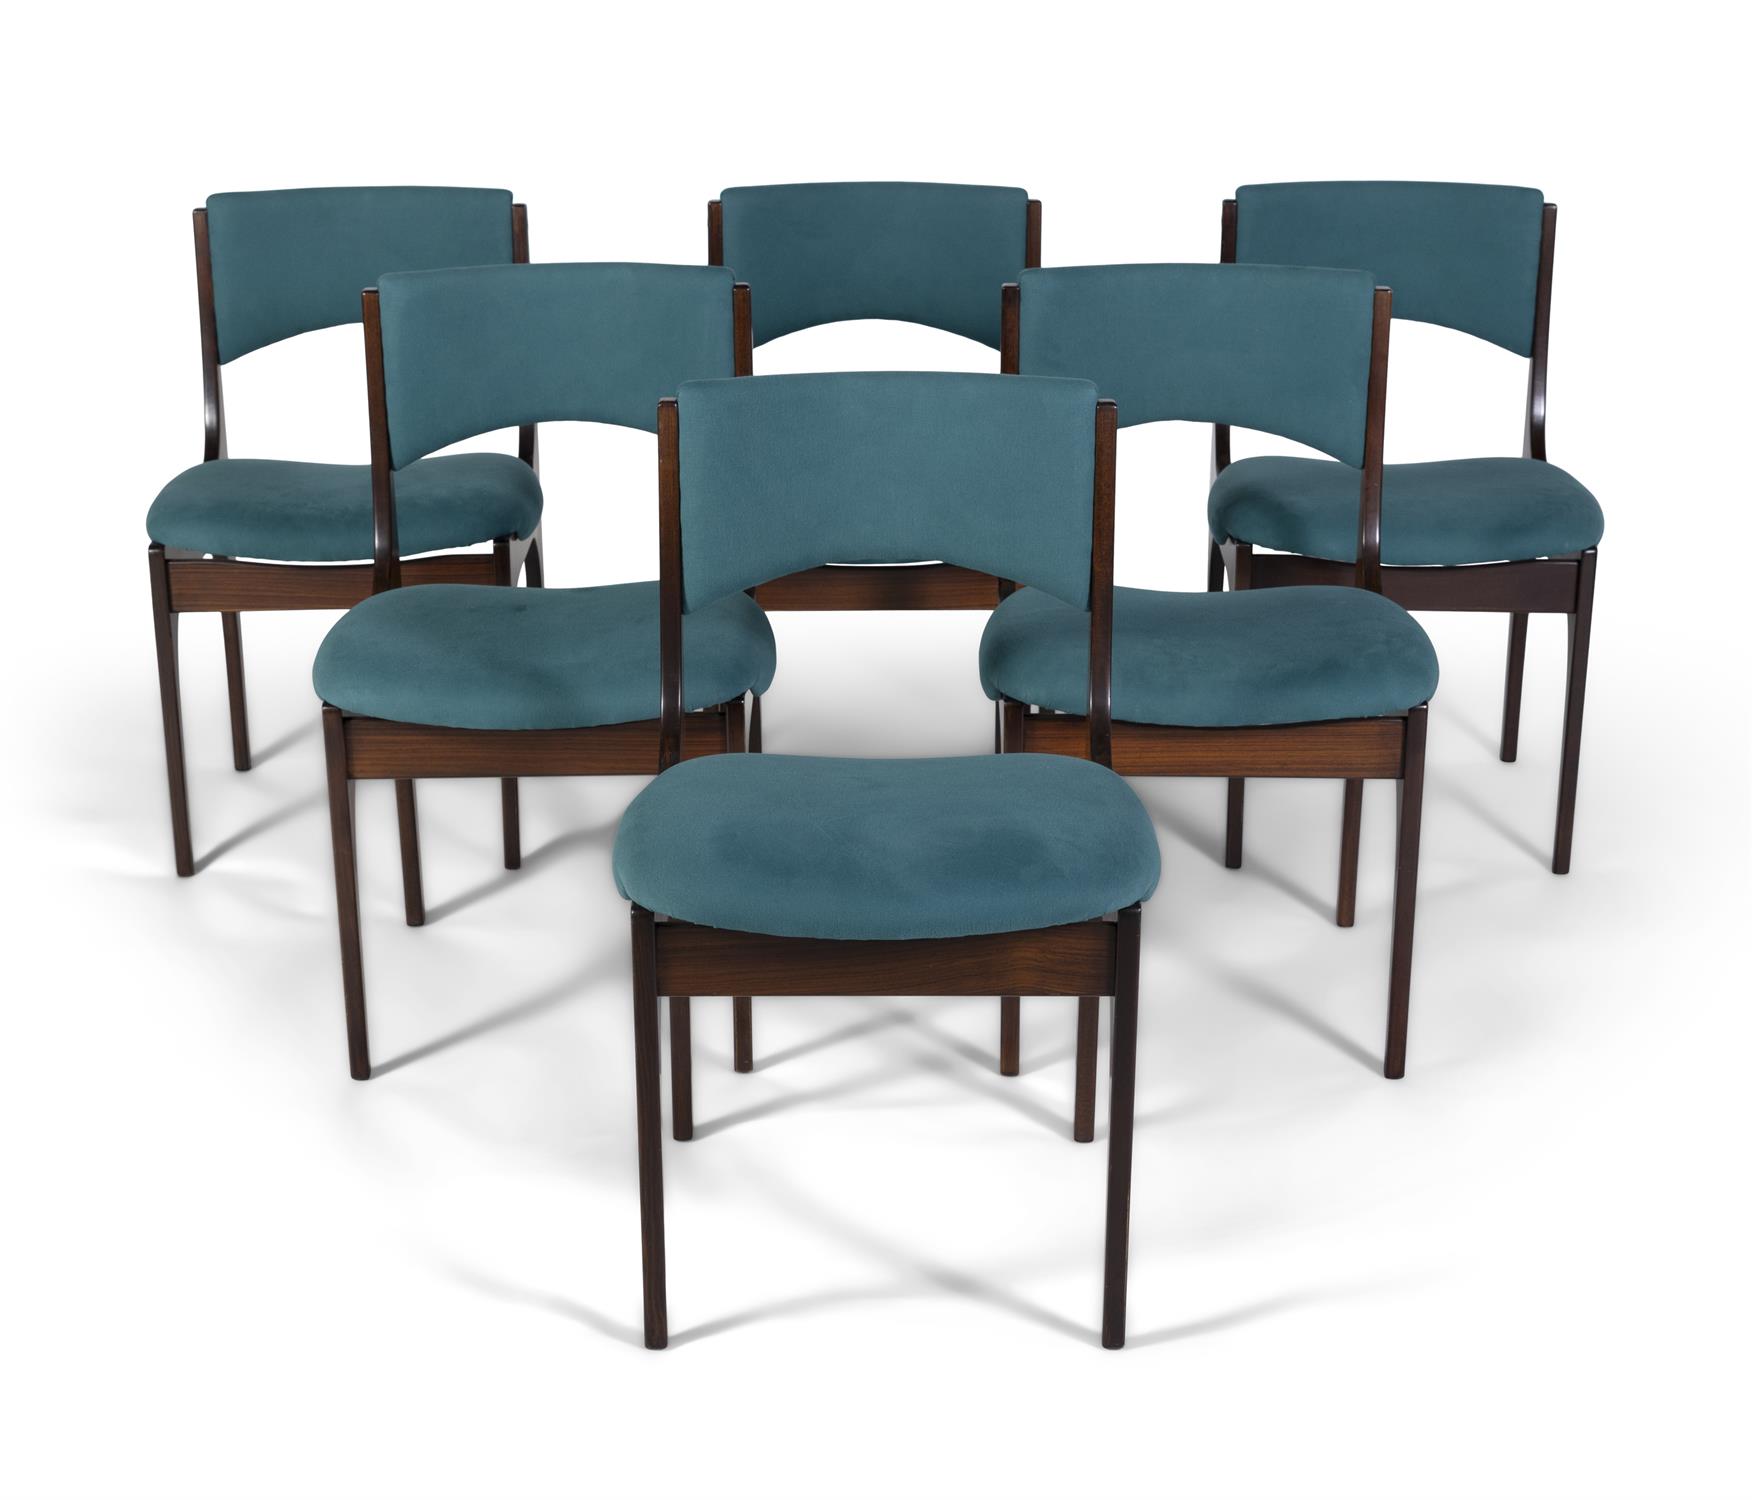 GIUSEPPE GIBELLI A set of six rosewood dining chairs by Giuseppe Gibelli for Sormani. Italy, c. - Image 3 of 7